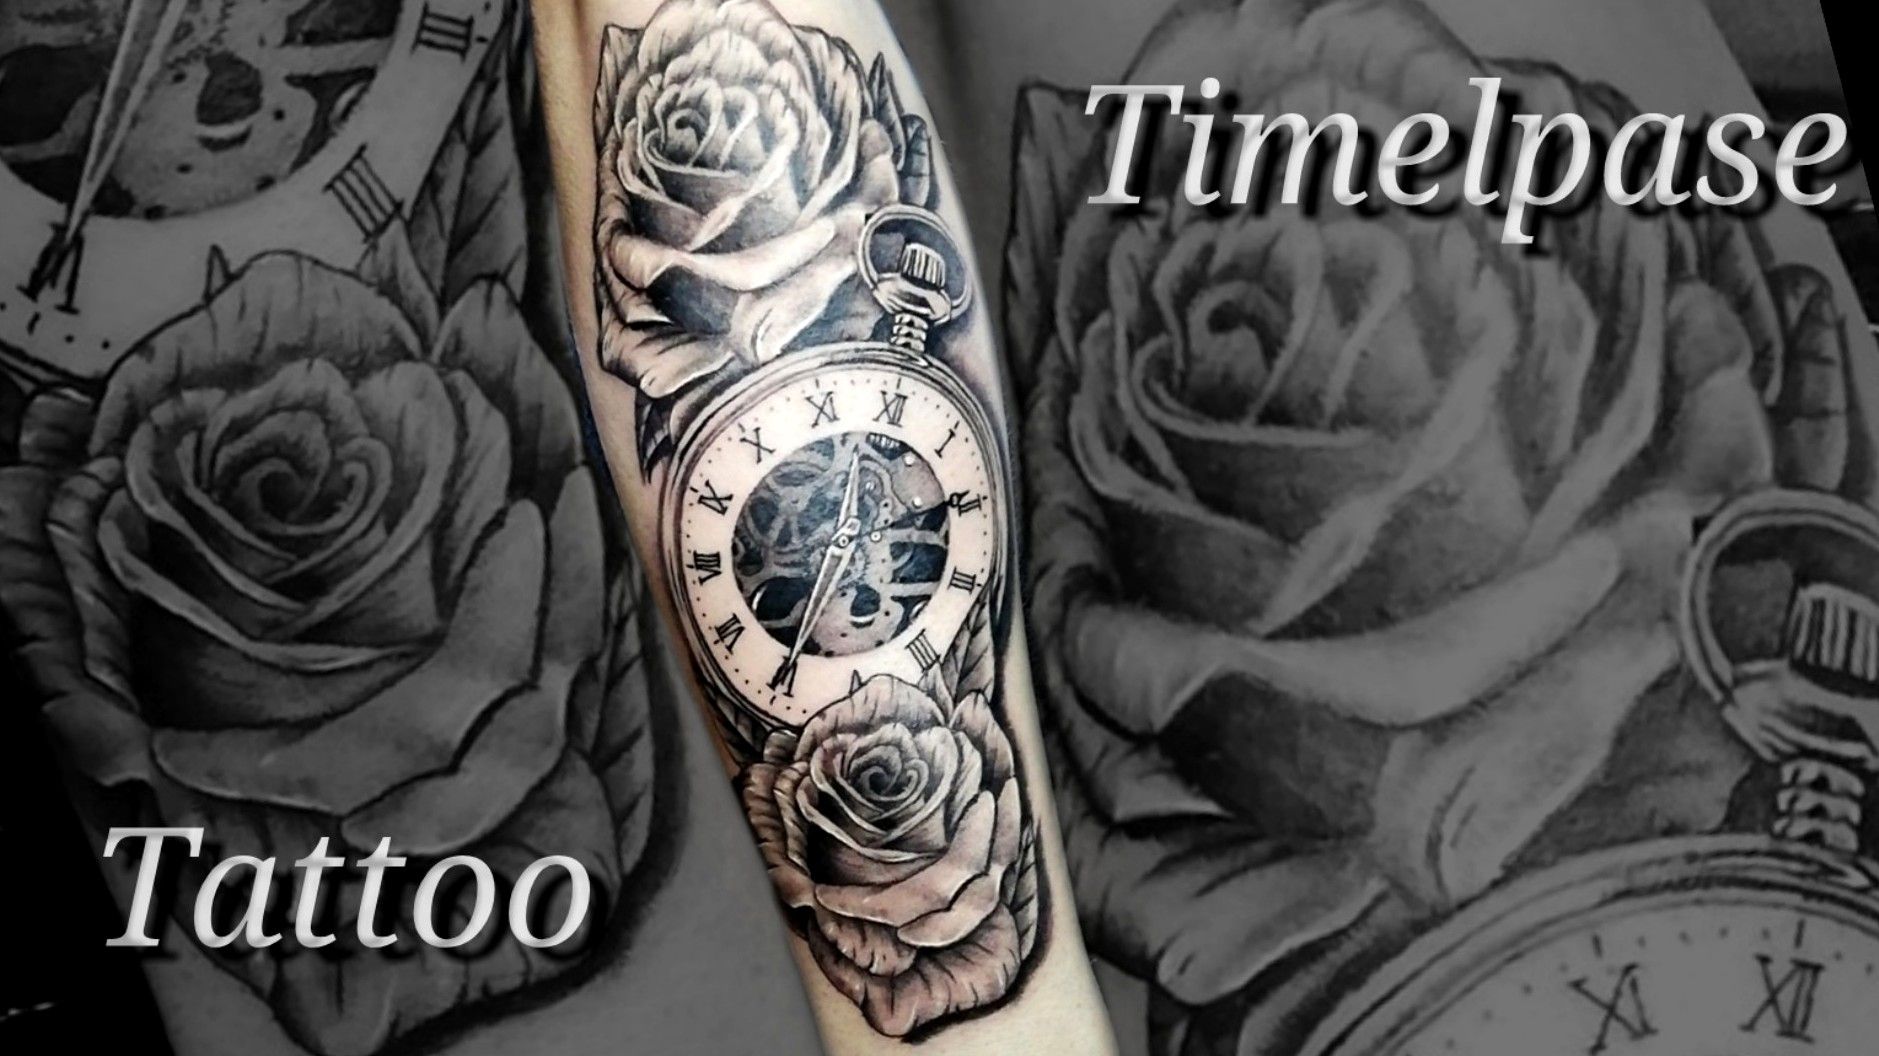 Tattoo uploaded by Thomtats7 • Yesterday session 💉 Timelapse on my youtube  channel: Thomtats7 🤙🏻 #rose #watch #halfsleeve #realism #blackandgrey  #blackandgreyrealism #intenzetattooink #fkirons #fadetheitch #stencilstuff  #inkeeze #kwadron #ink #inked ...